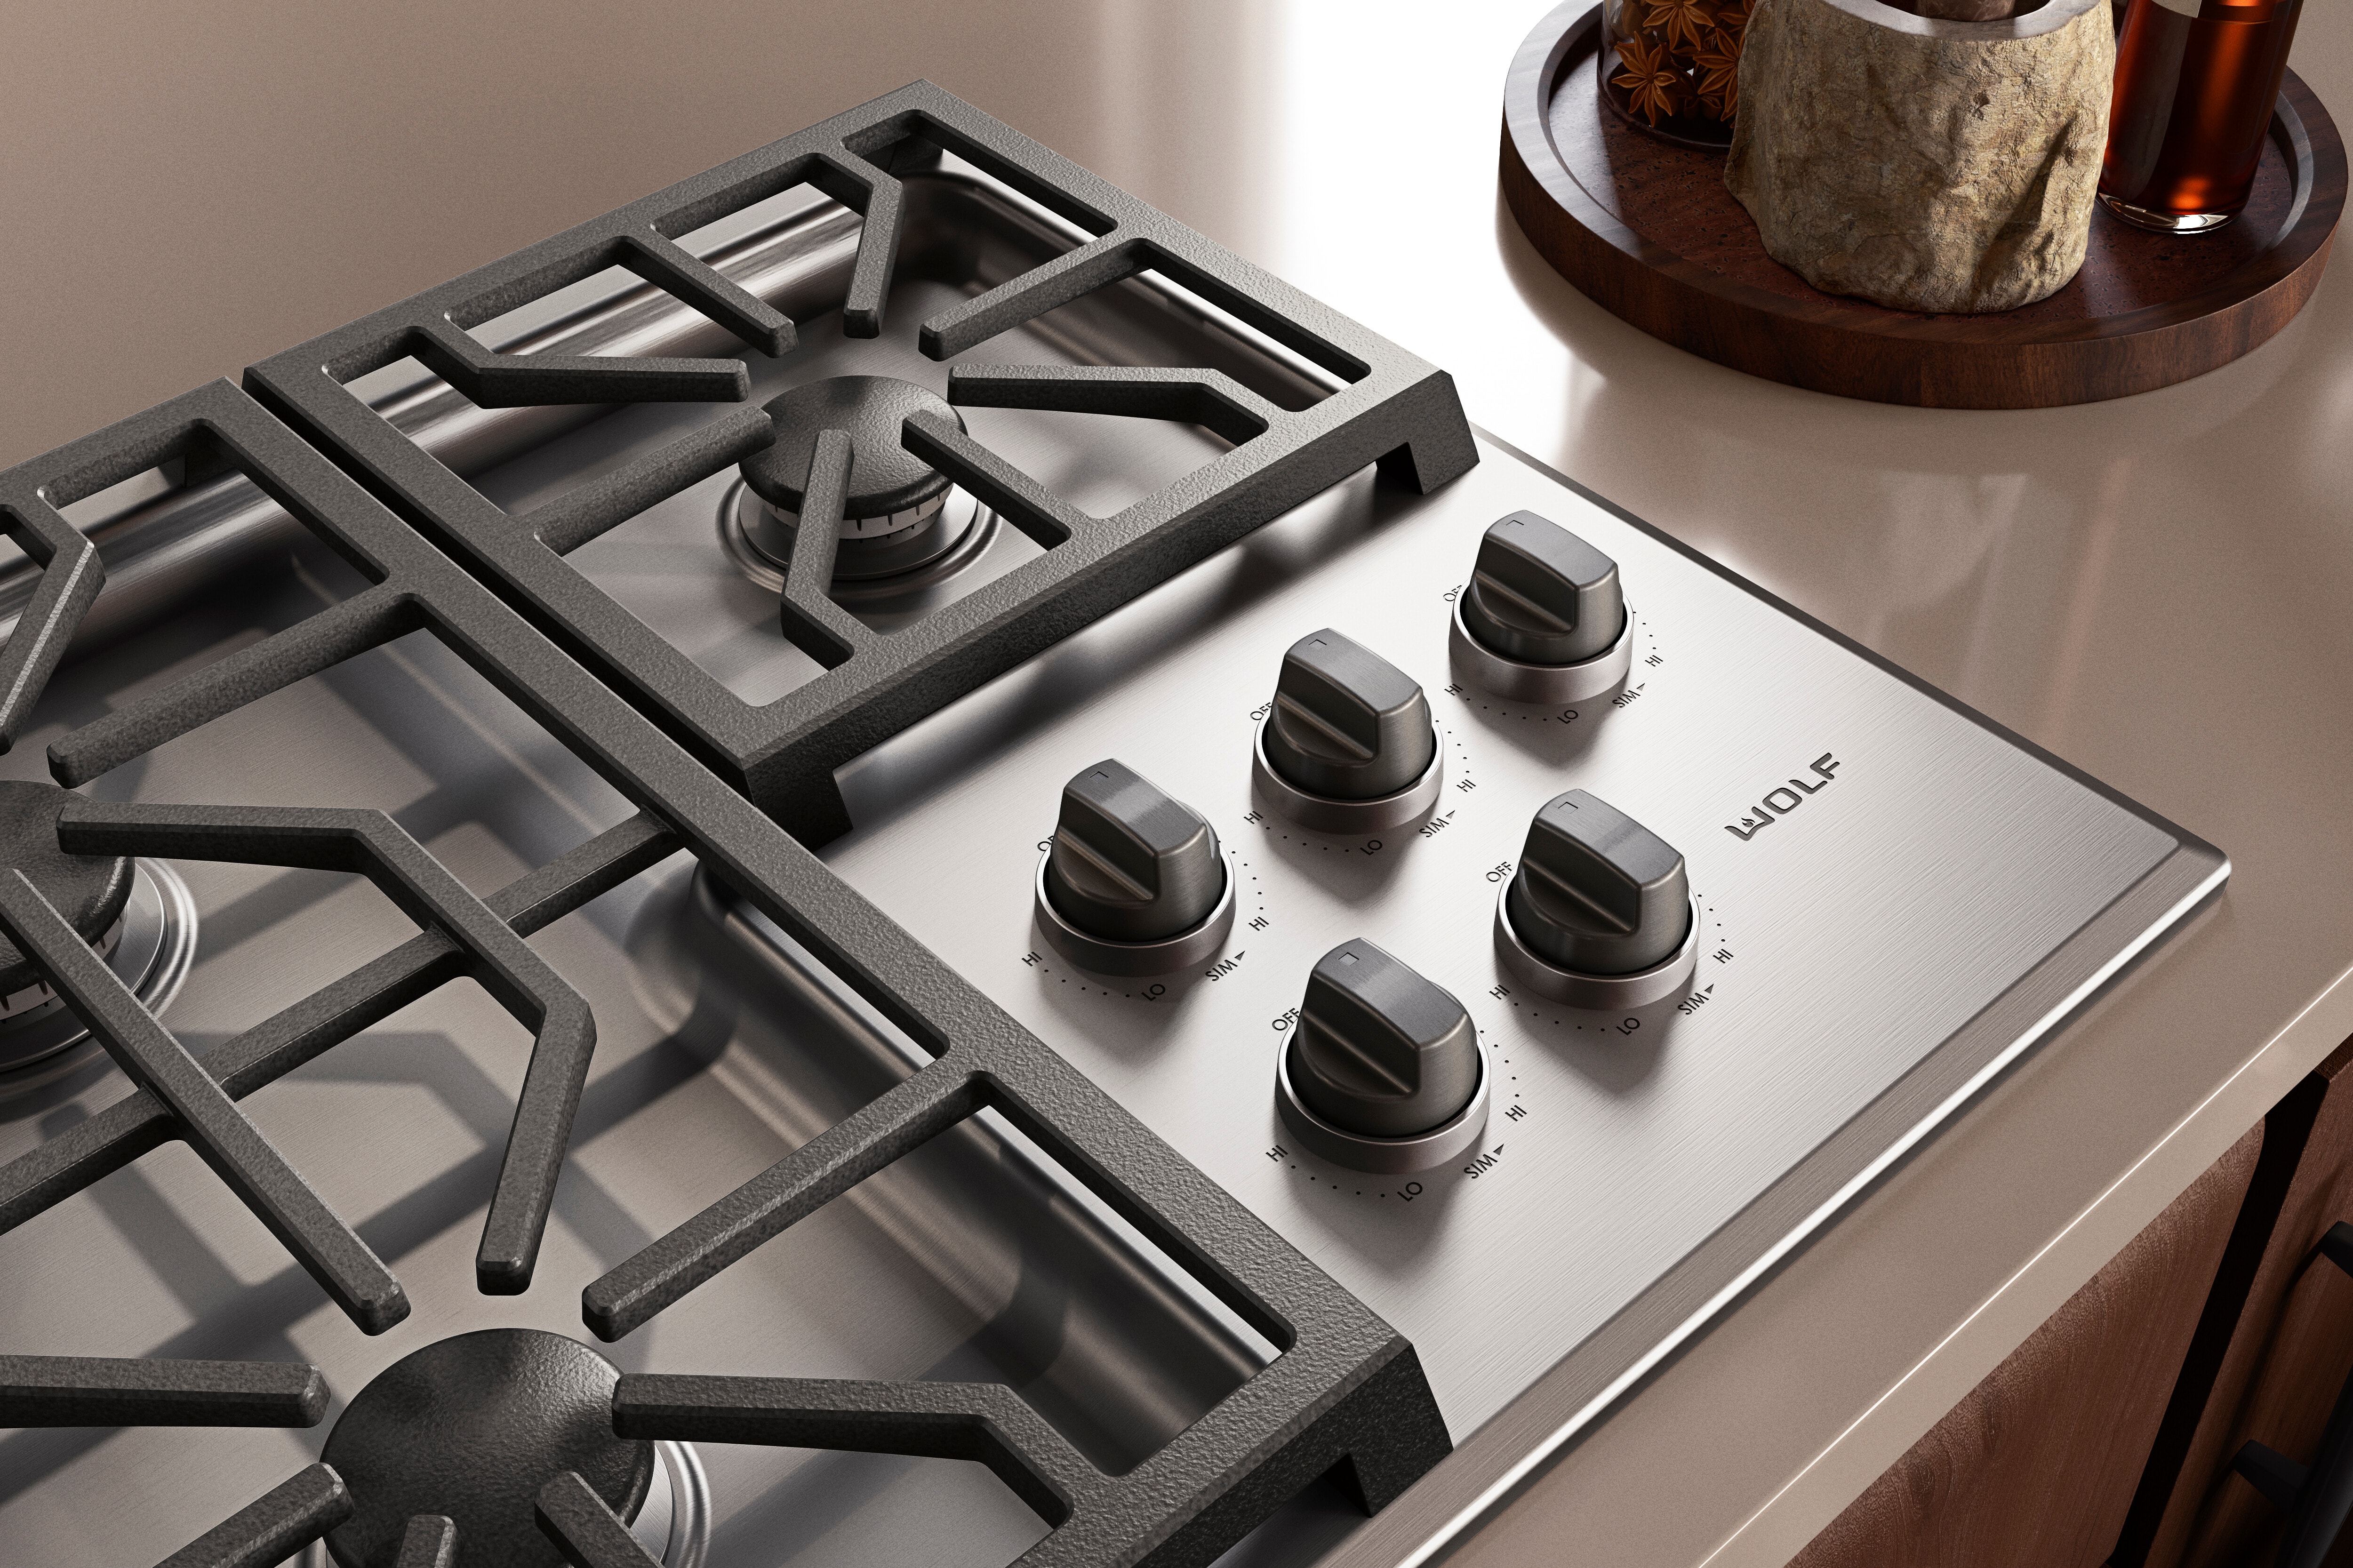 https://www.subzero-wolf.com/wolf/cooktops-and-rangetops/gas-stovetop/-/media/images/web20/pdp-color-options/knobs/22-subzero_knob-bezel-accents_cooktop-cg365ps_grey.jpg